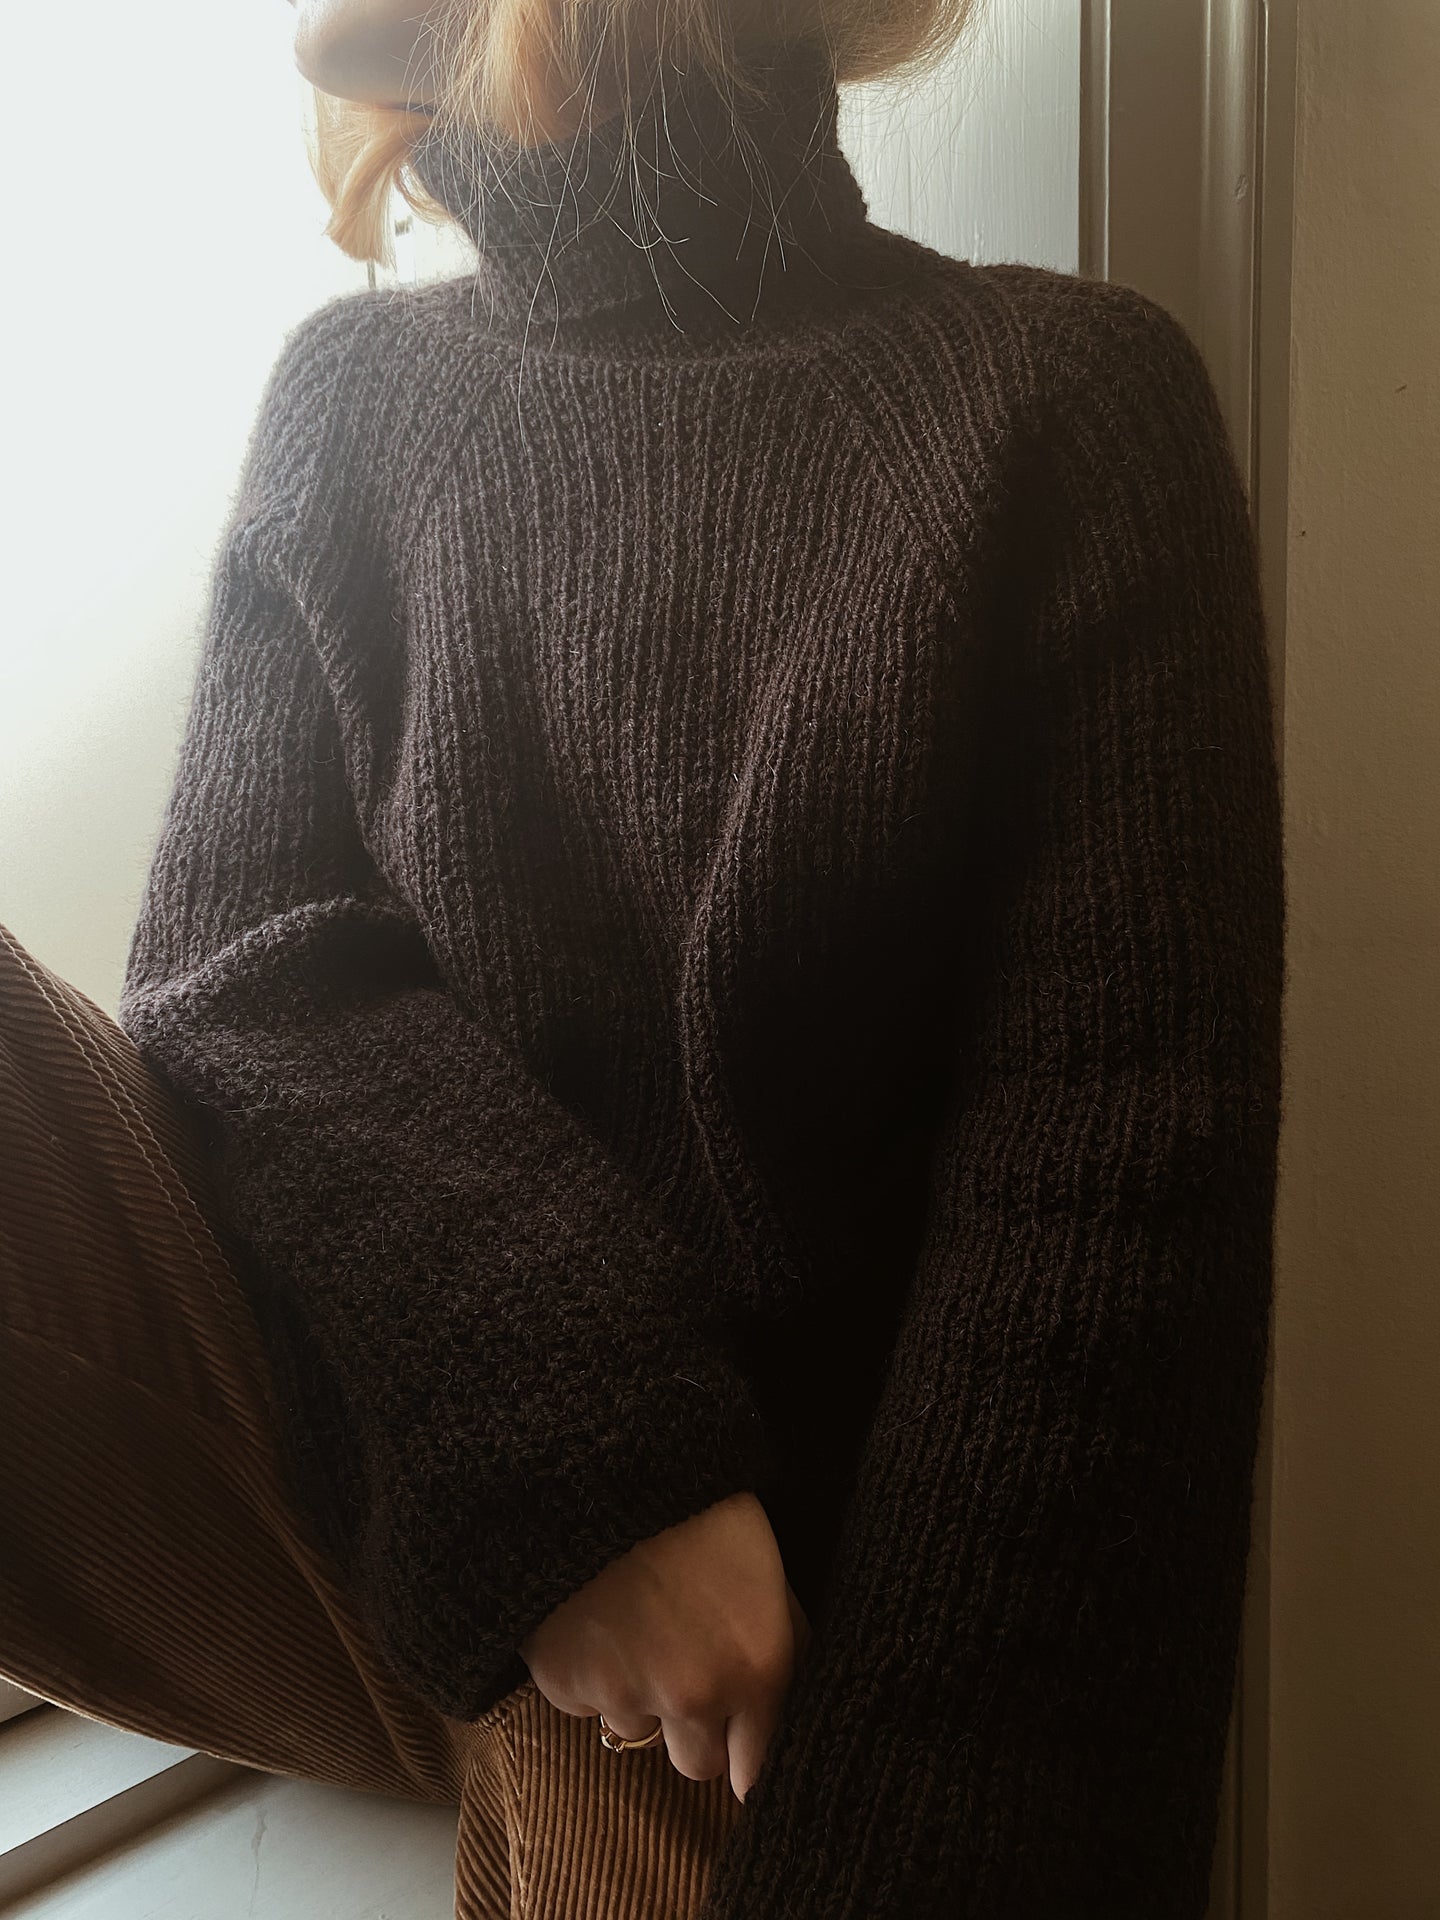 Sweater No. 13 - NORSK